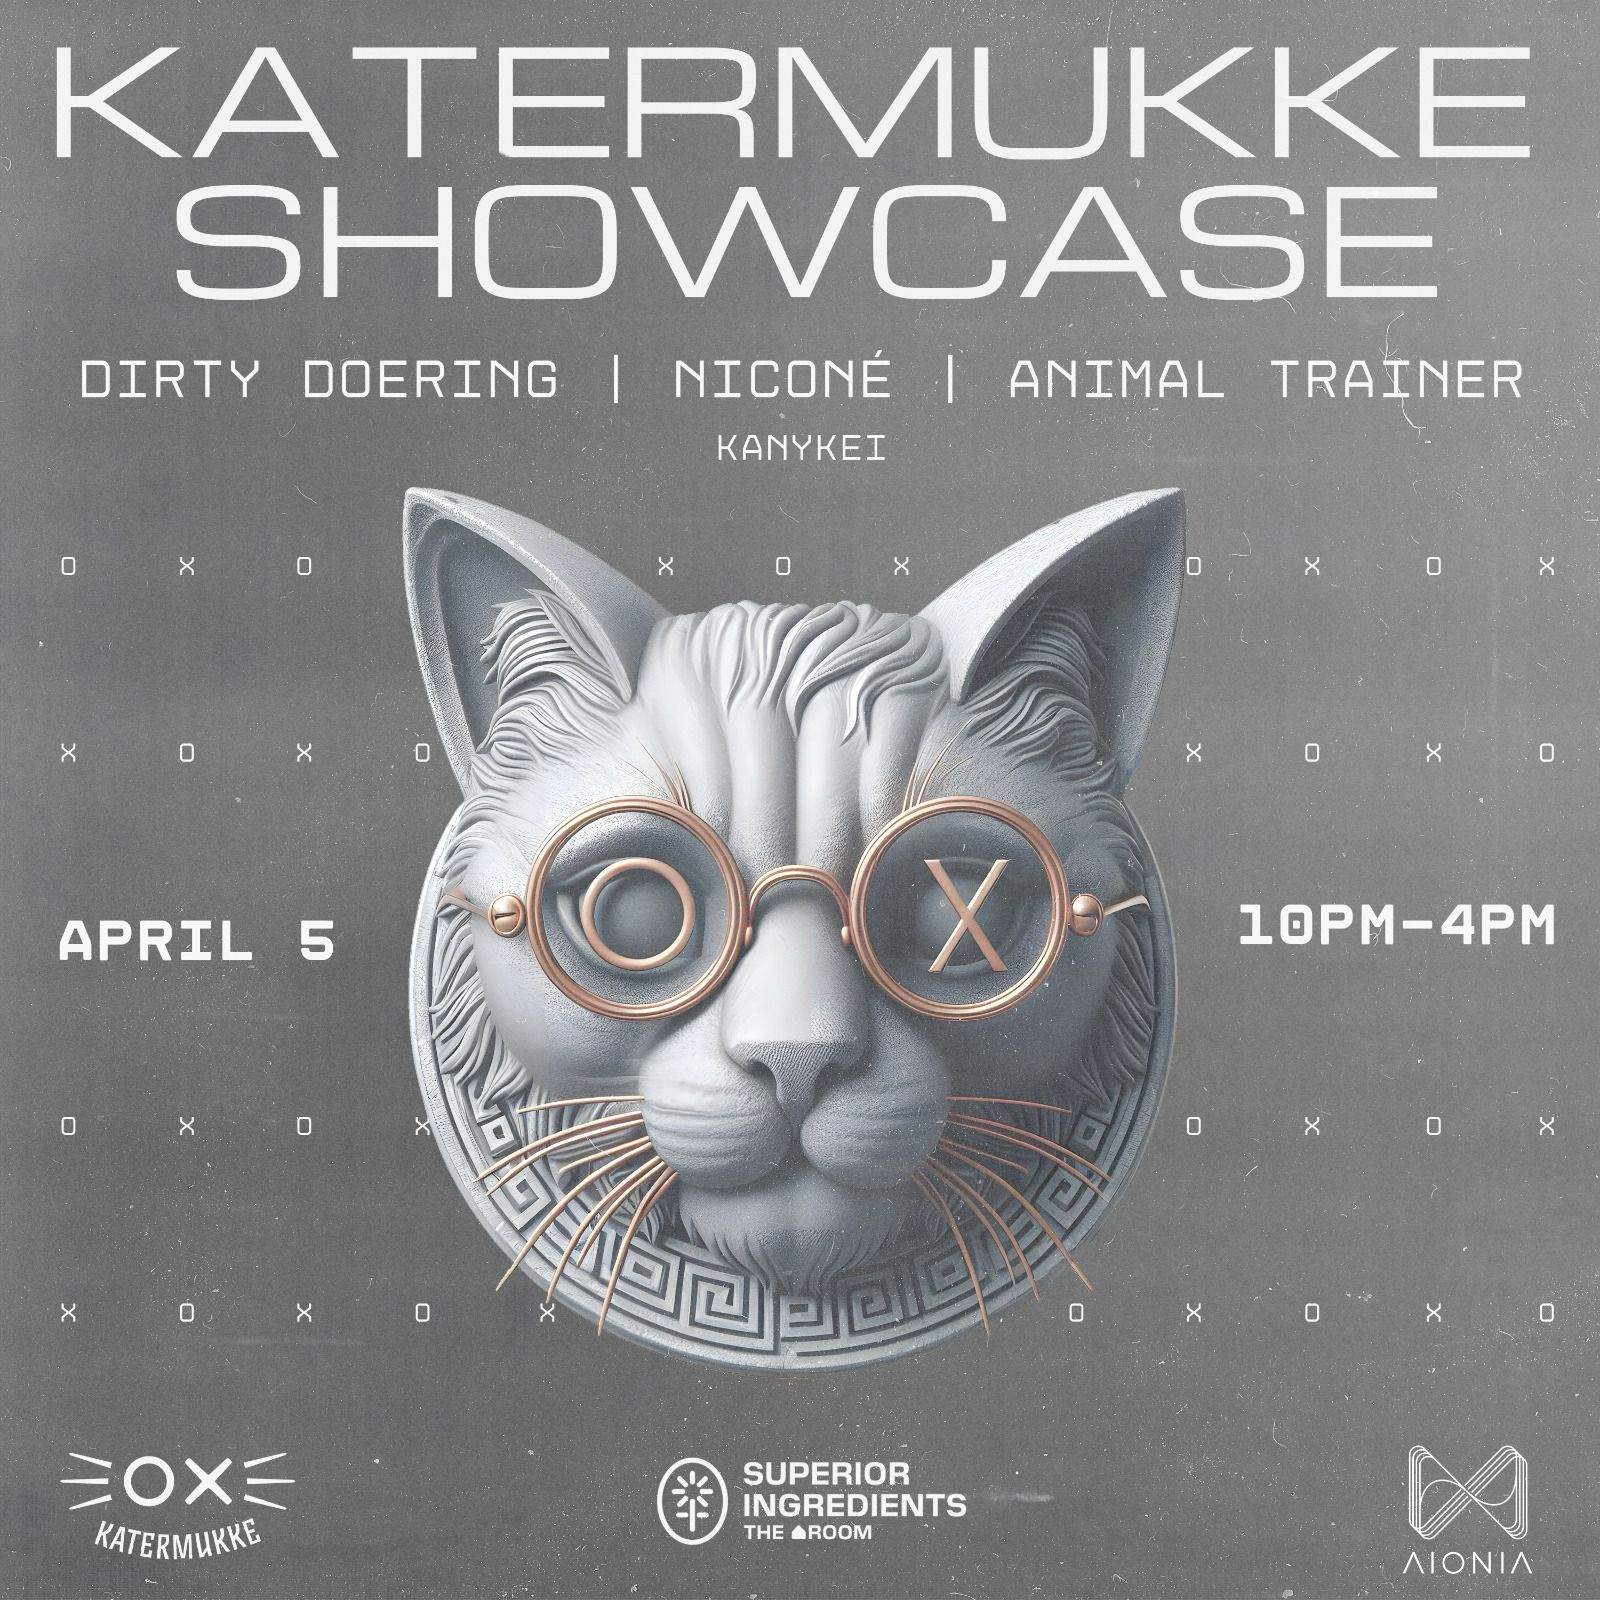 AIONIA: NYC Katermukke Showcase with Dirty Doering, Nicone, Animal Trainer **TICKETS ===>> DICE** - Página trasera